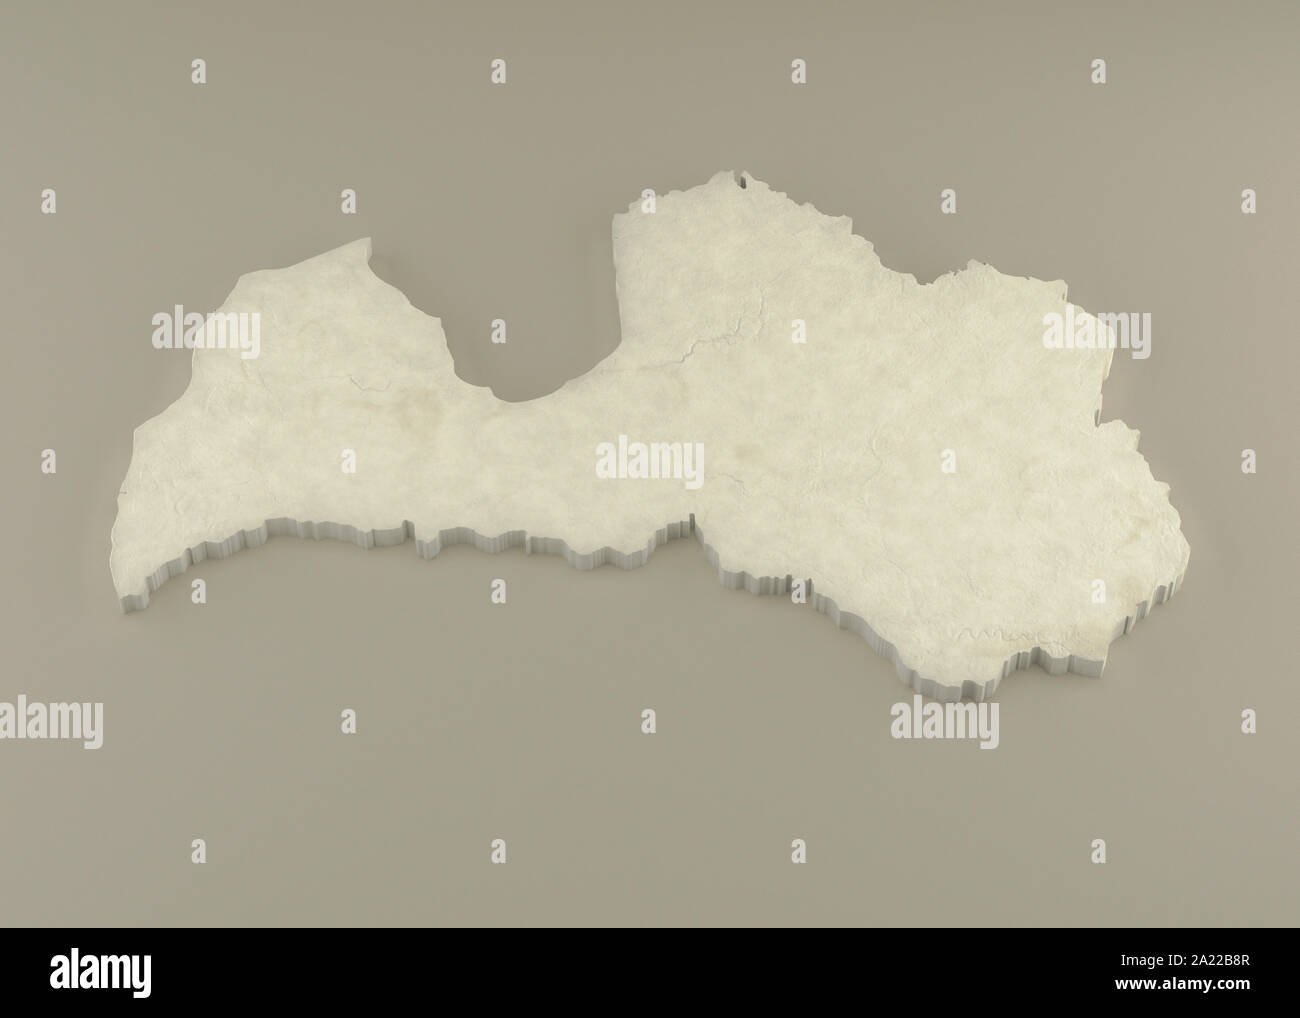 Extruded 3D political Map of Latvia with relief as marble sculpture on a light beige background Stock Photo